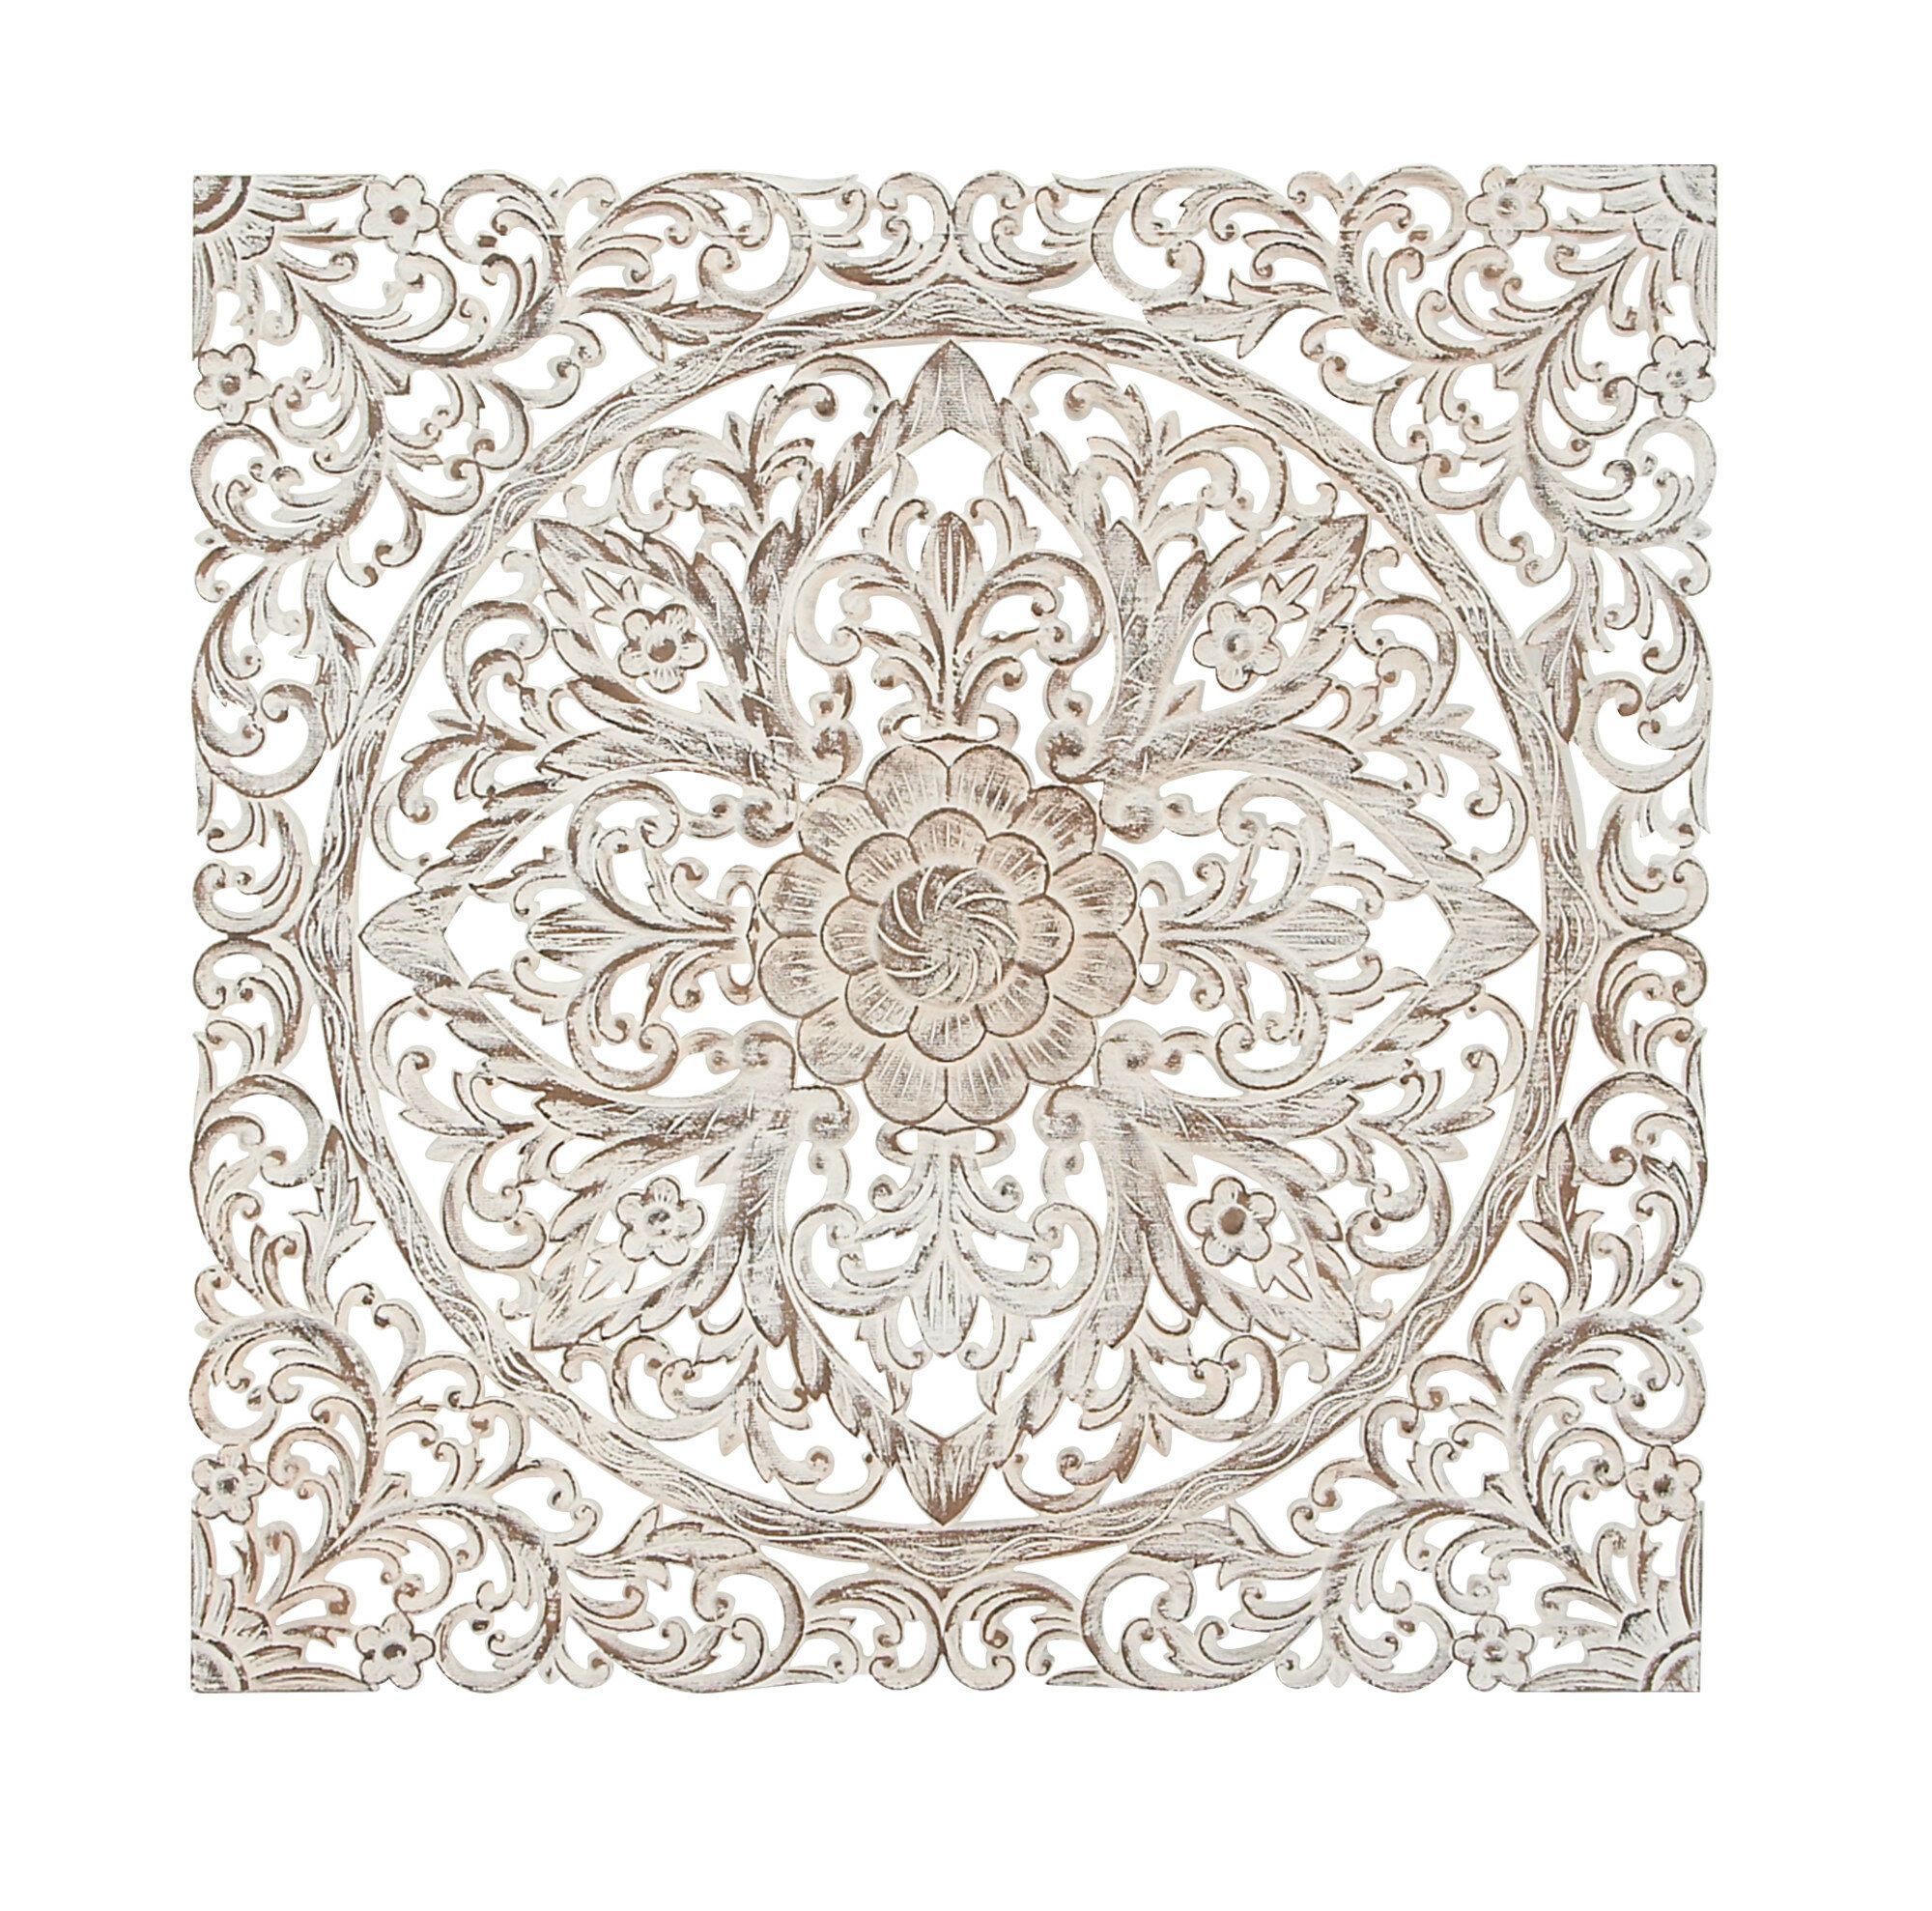 Traditional Carved Floral Medallion Wall Decor Intended For Shabby Medallion Wall Decor (View 8 of 30)